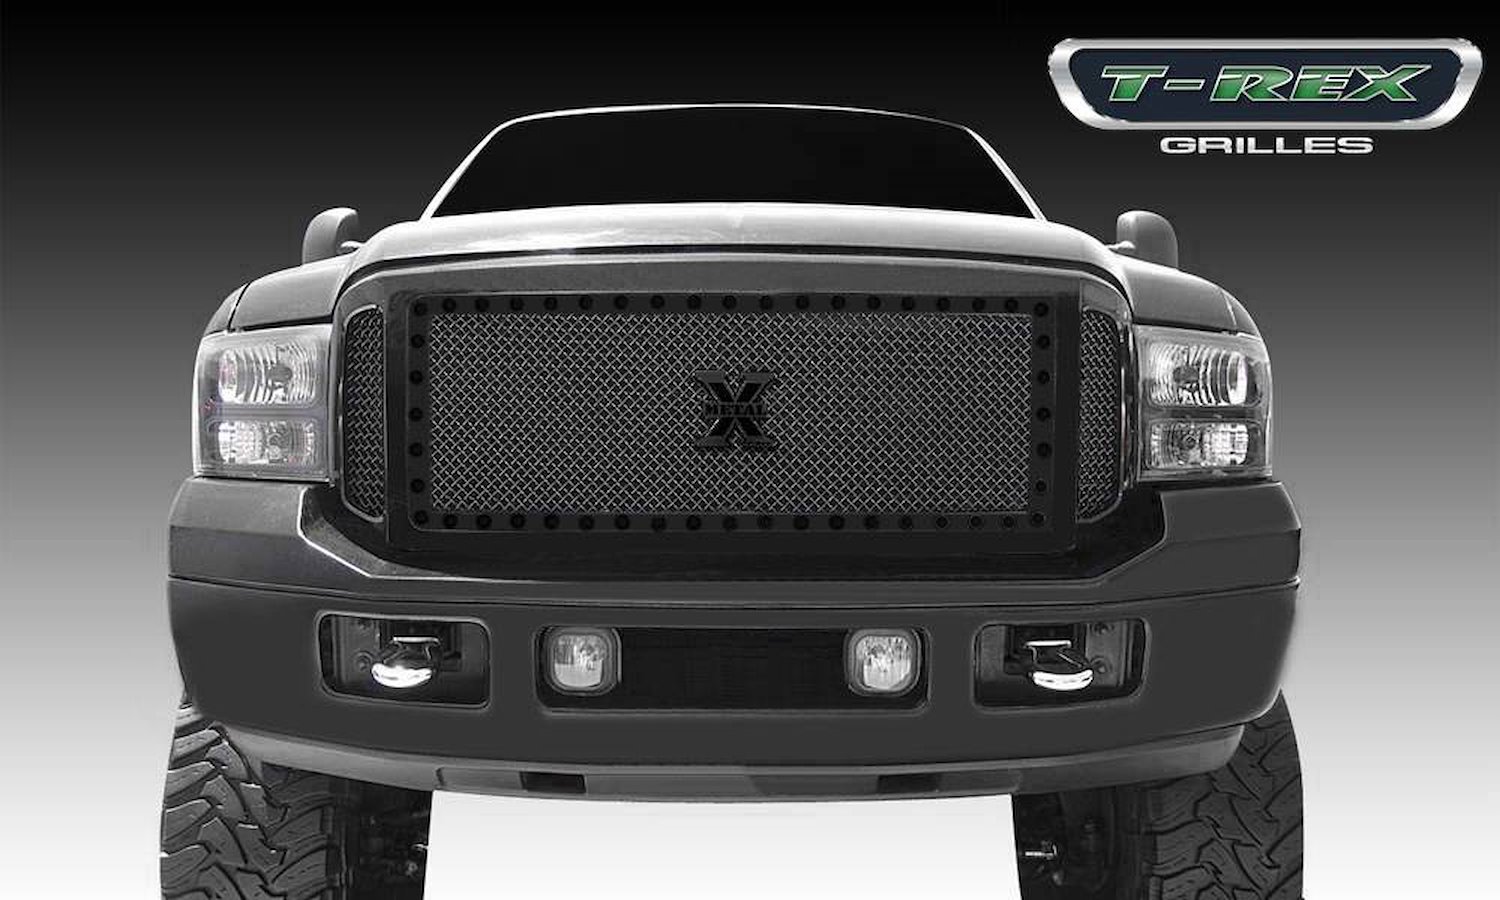 X-METAL Series - Studded Main Grille - ALL Black - 3 Pc Center Insert has Frame and Studs - Side Gri